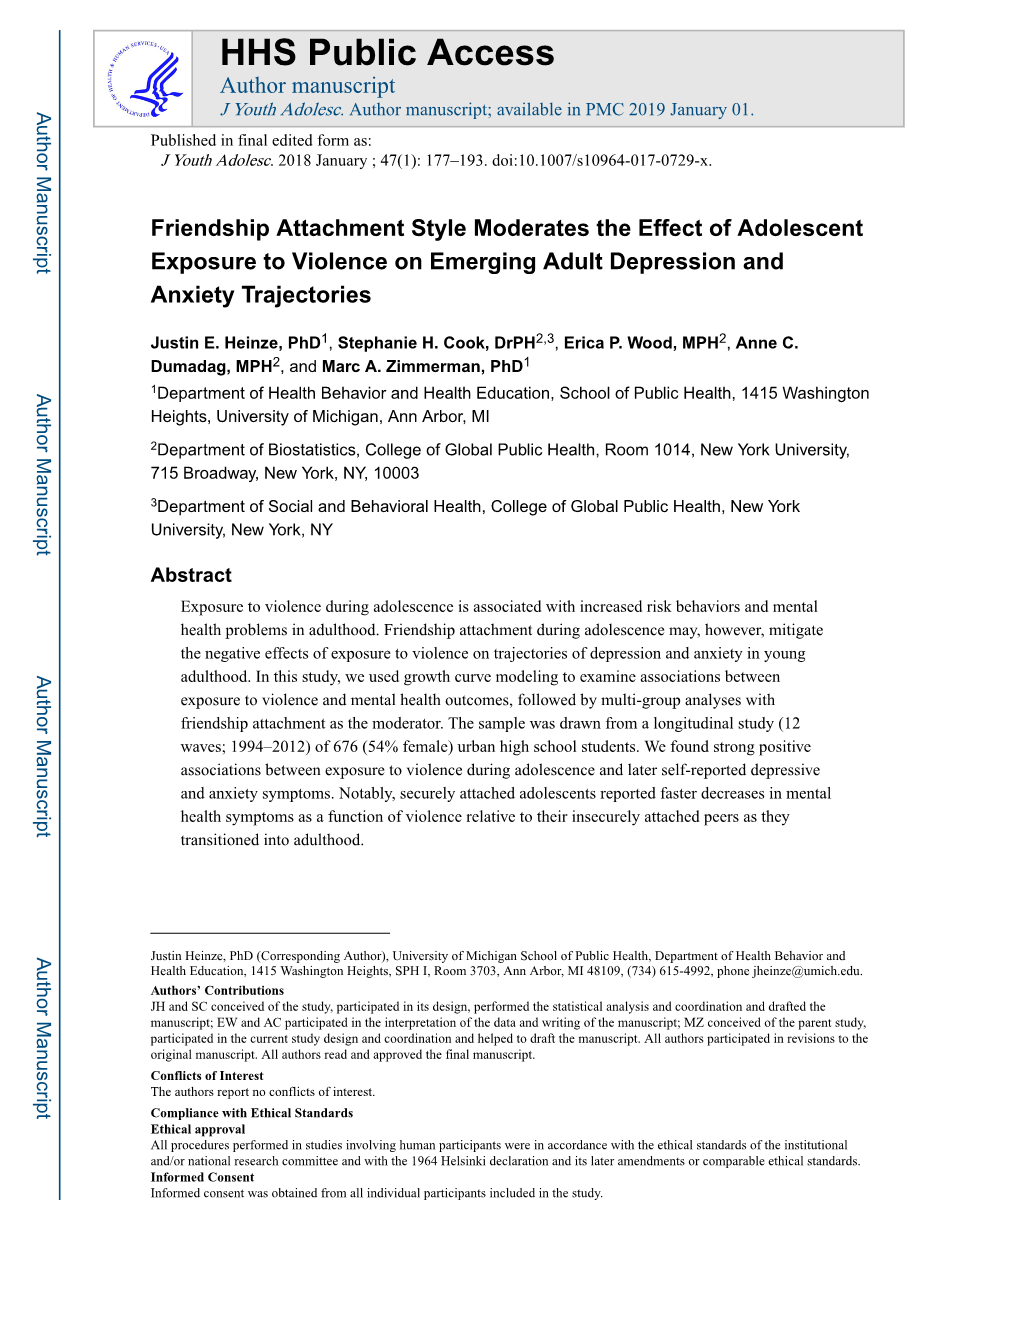 Friendship Attachment Style Moderates the Effect of Adolescent Exposure to Violence on Emerging Adult Depression and Anxiety Trajectories